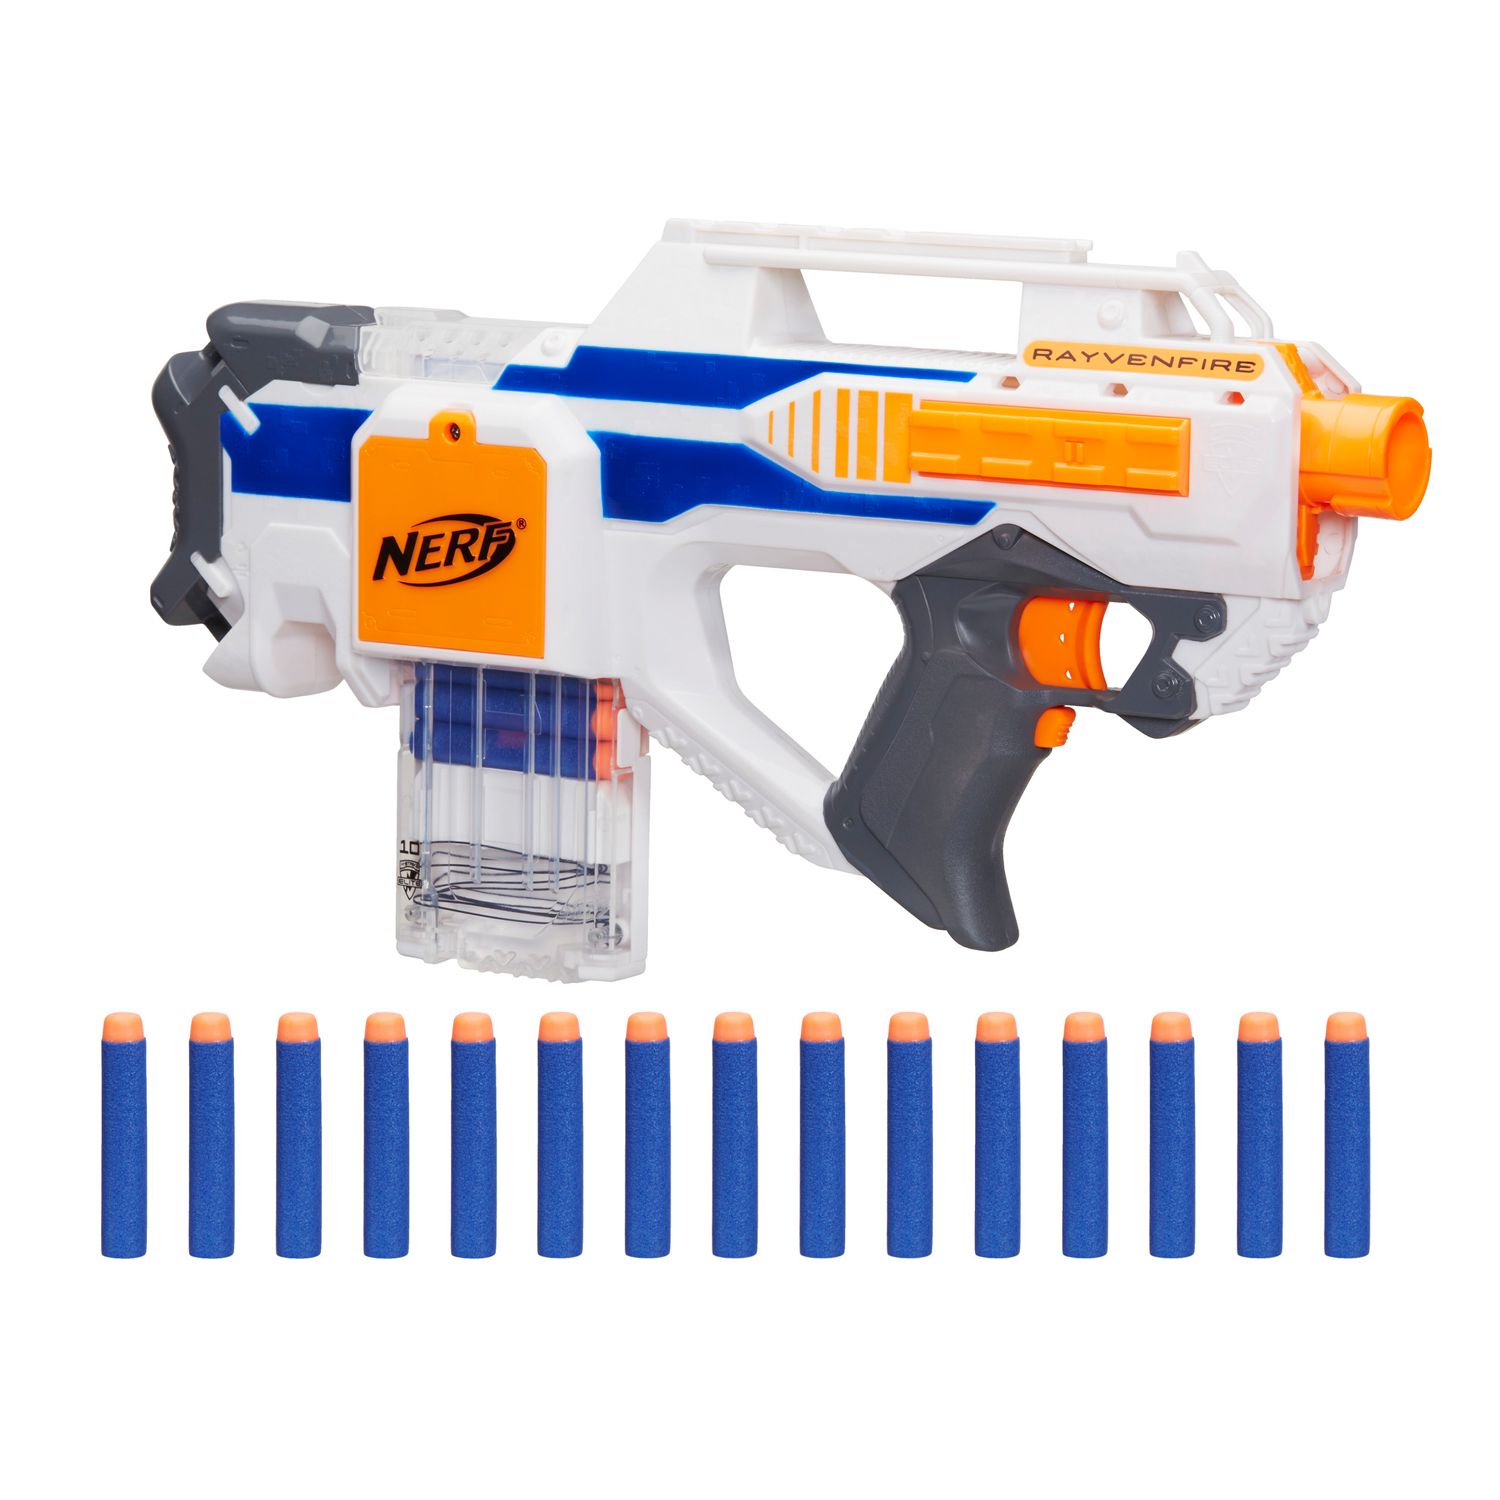 nerf search fire